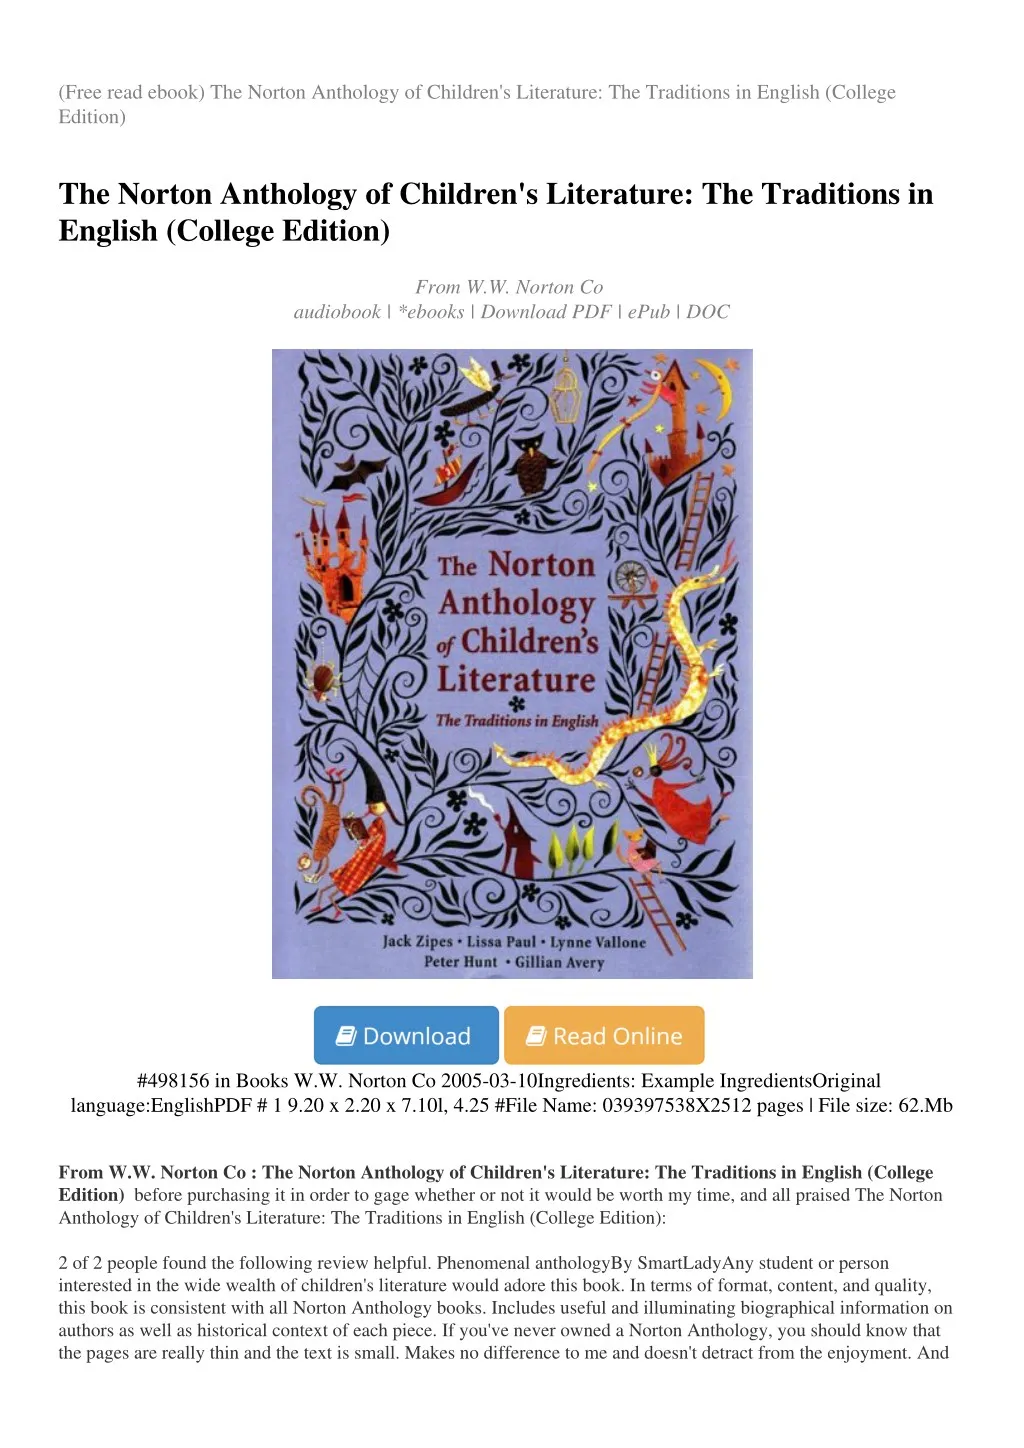 free read ebook the norton anthology of children